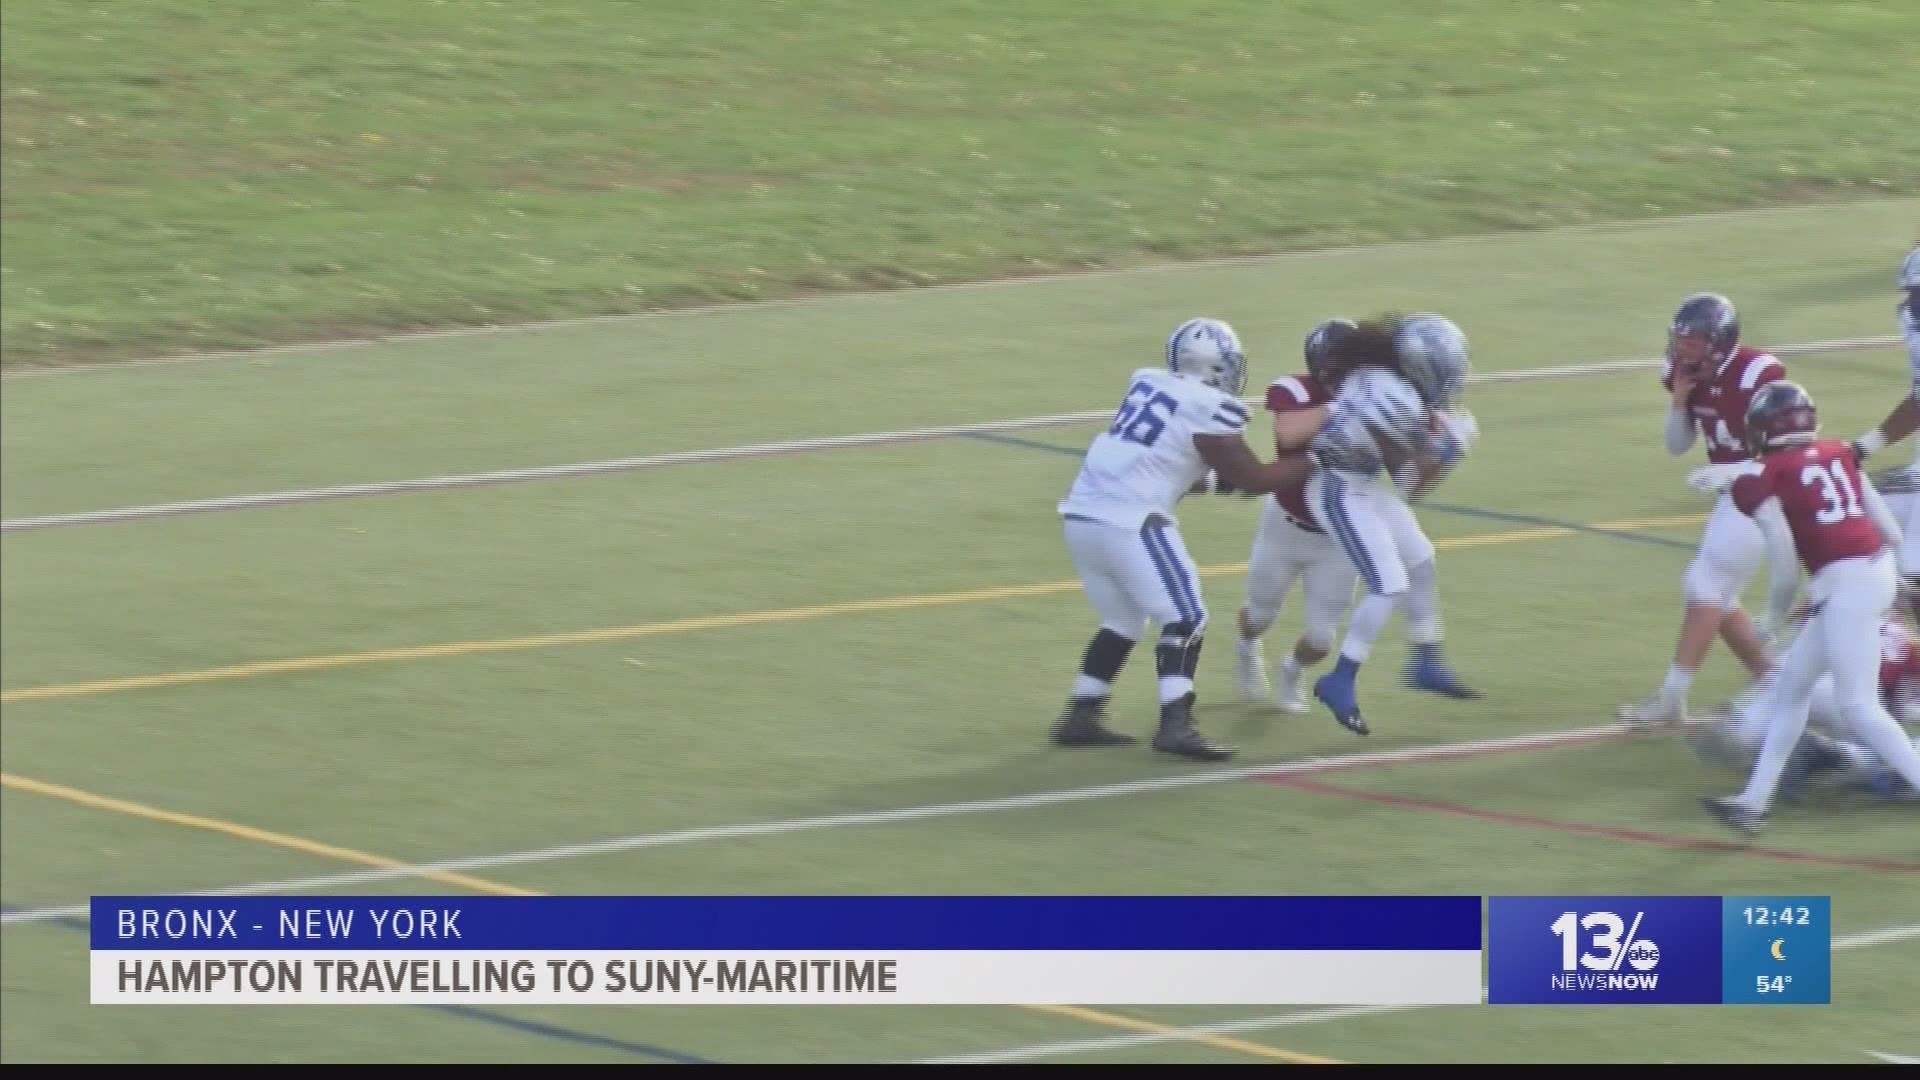 Quarterback, Delmon Williams tossed 3 touchdowns as Hampton rolled past SUNY-Maritime 51-10 for their 4th win in a row.